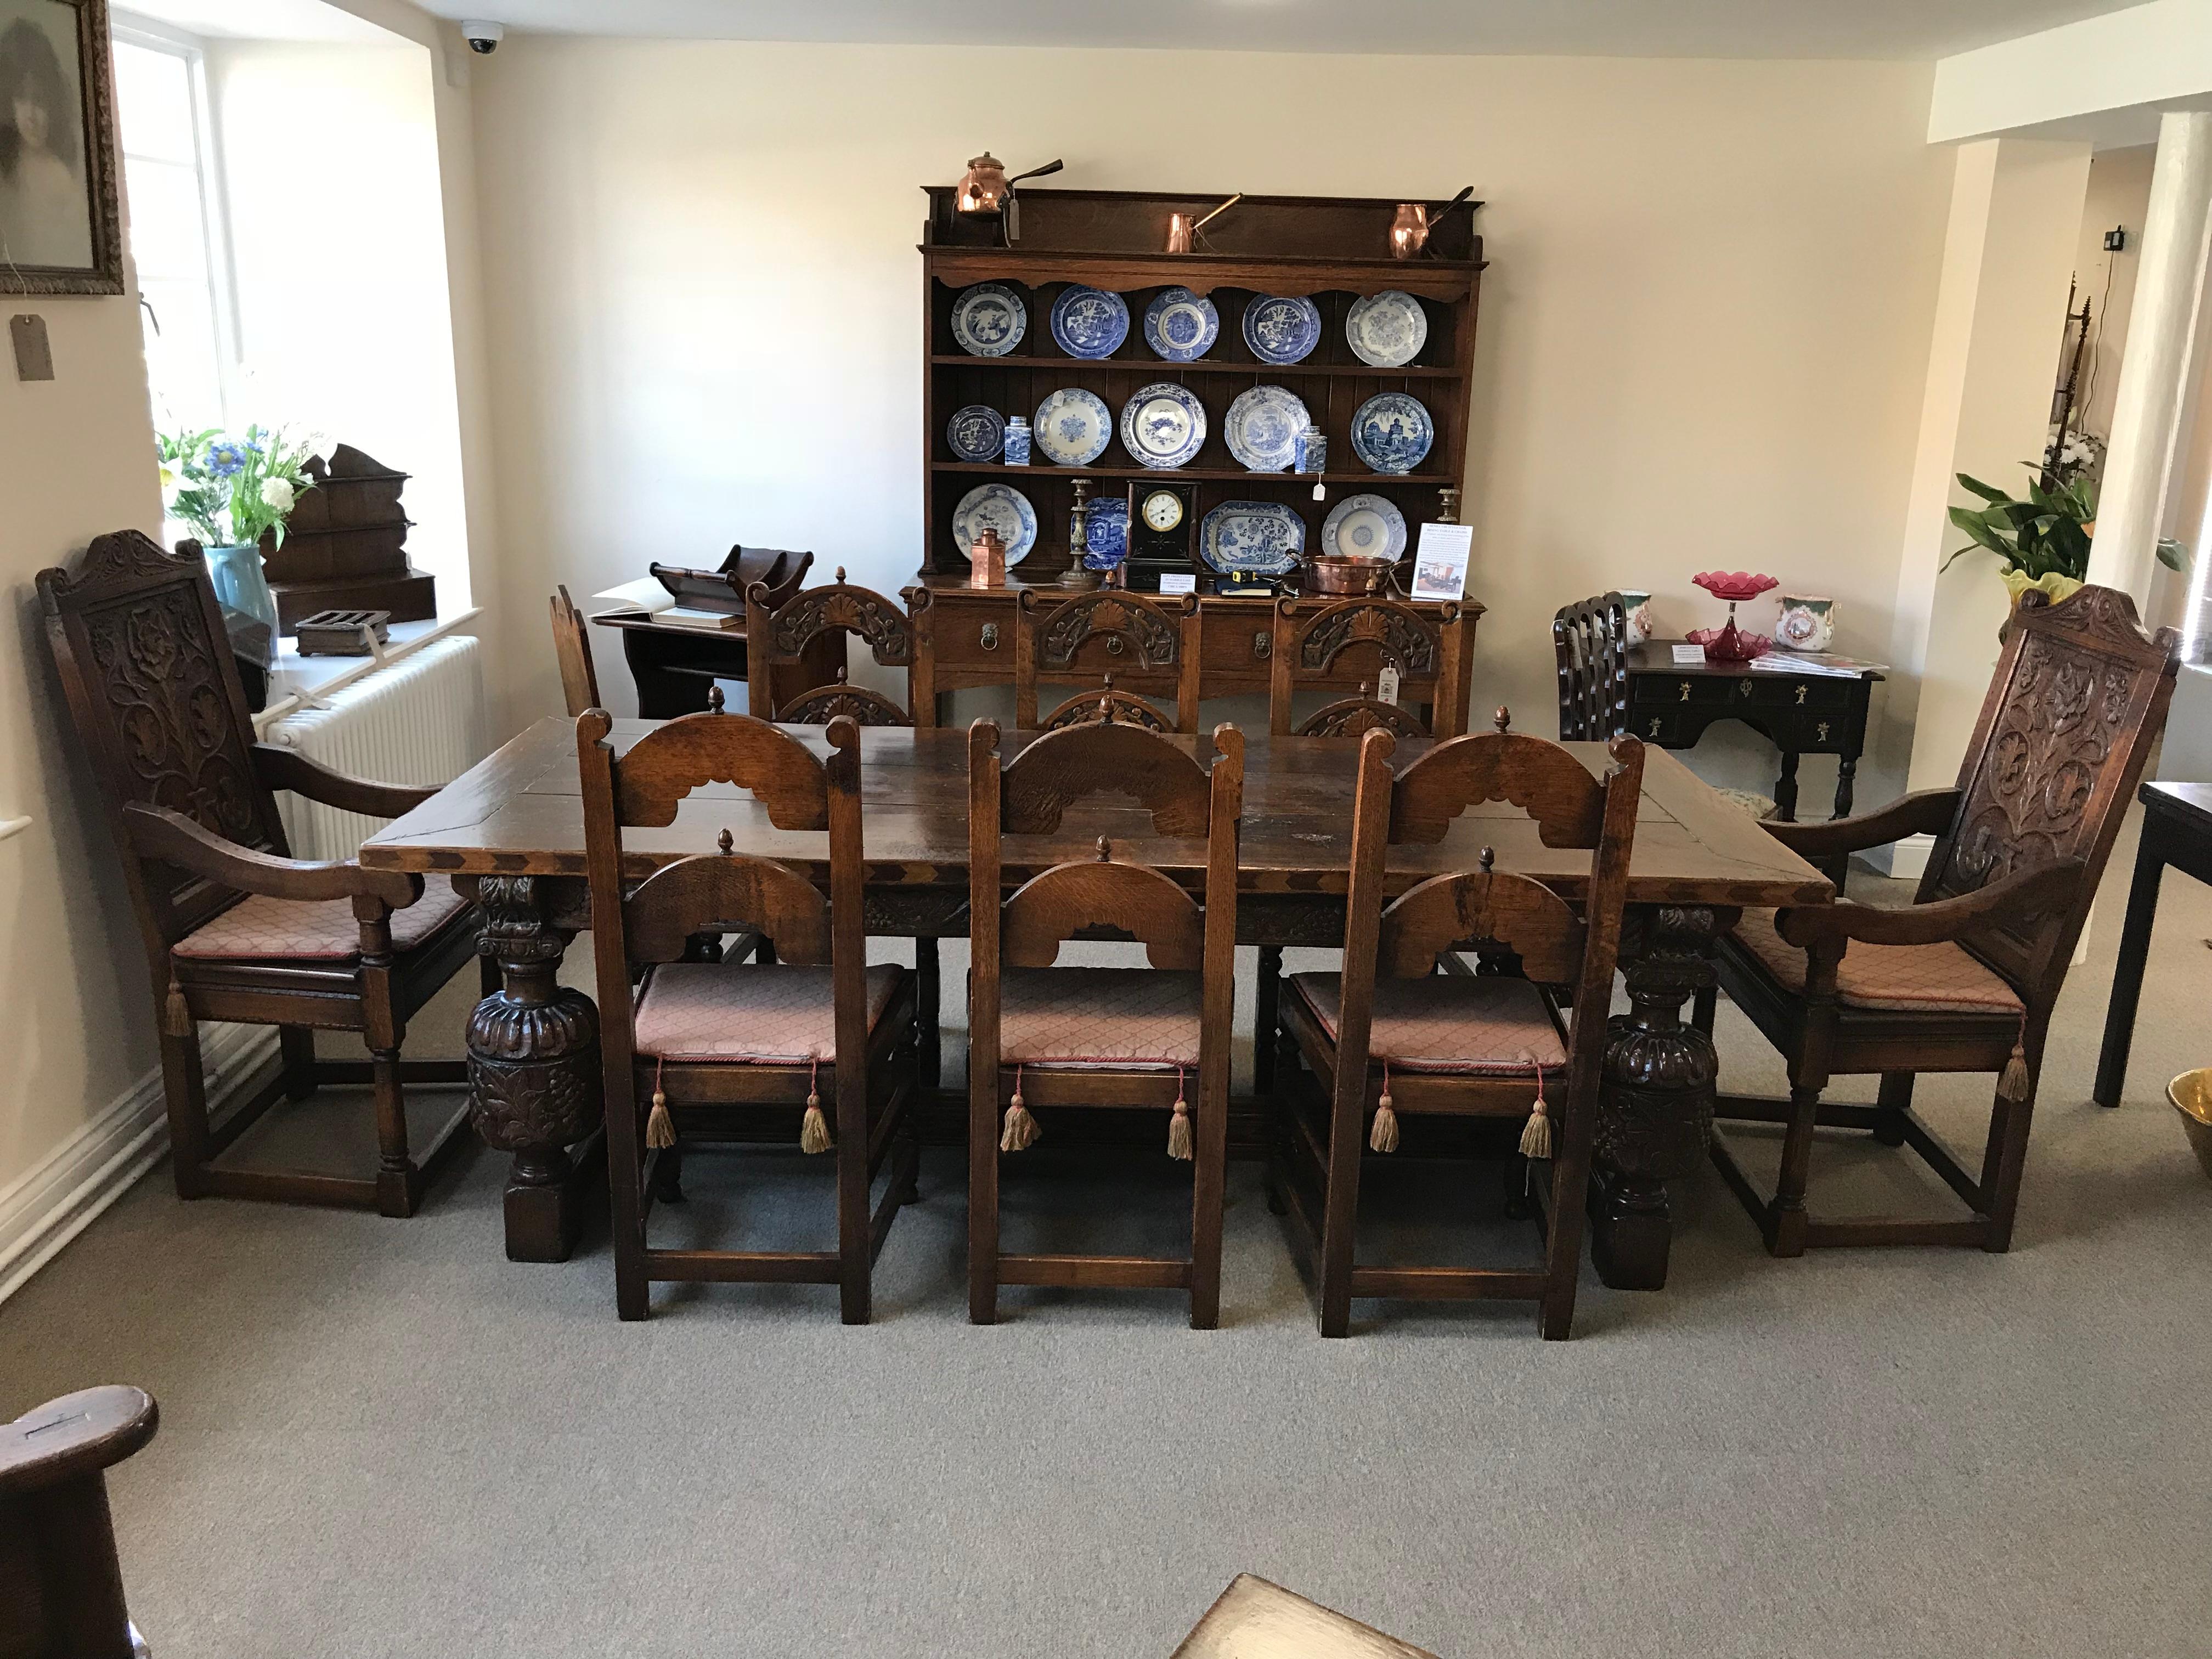 Superior quality handmade fully carved oak refectory table with carved cup and cover legs with beautiful walnut and sycamore inlay to the sides of the table top and strecher. Seats eight people comfortably, the pictured chairs are also currently